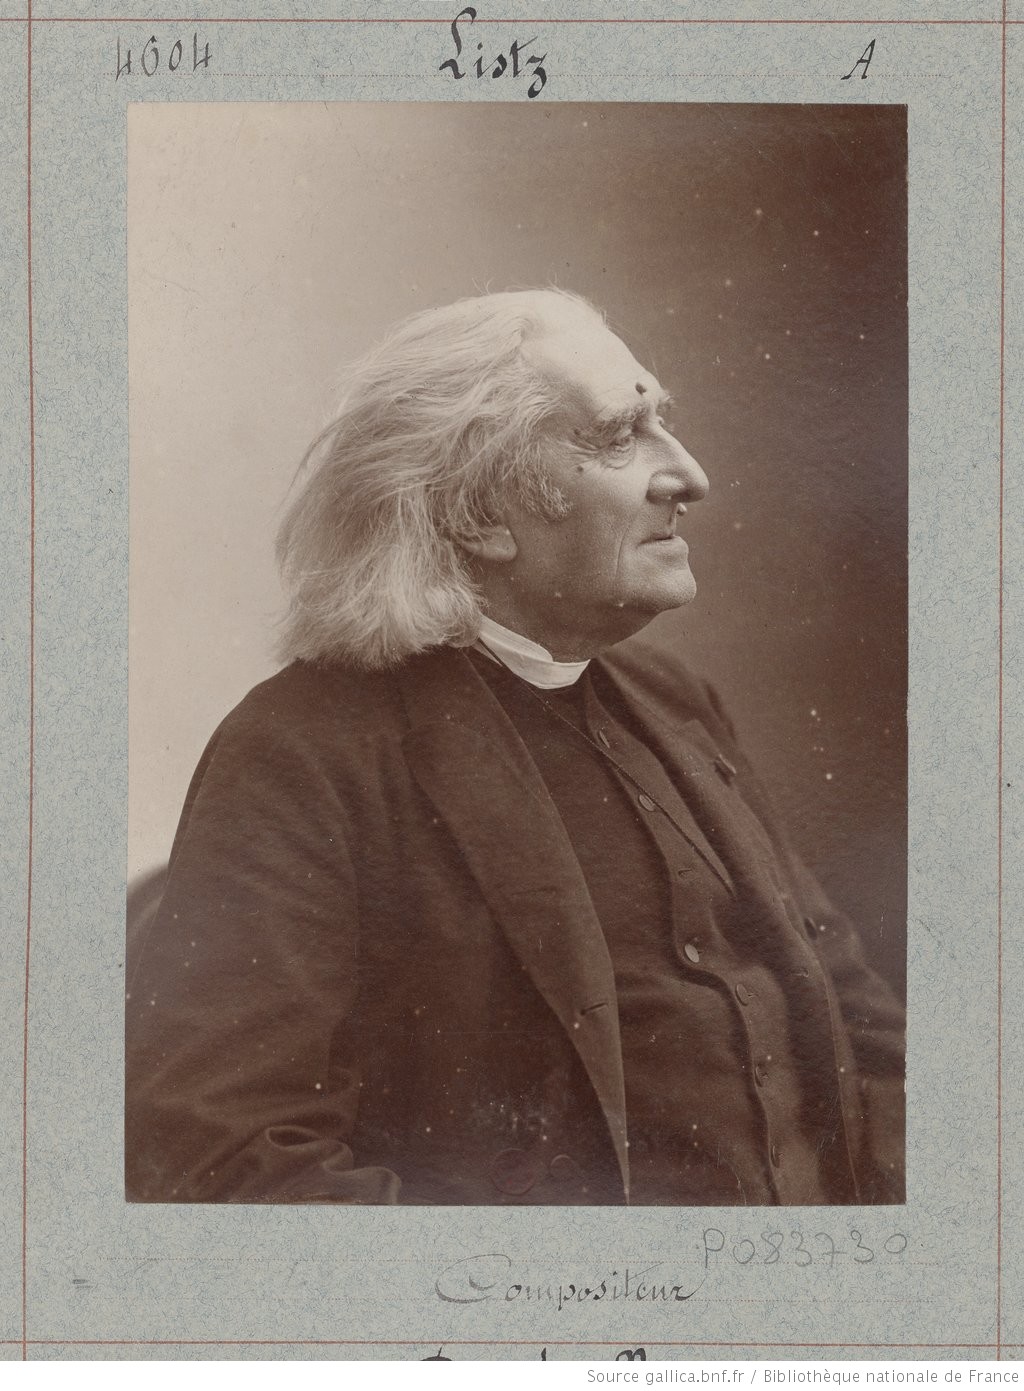 Liszt portrait number 4 in black and white taken by Nadar